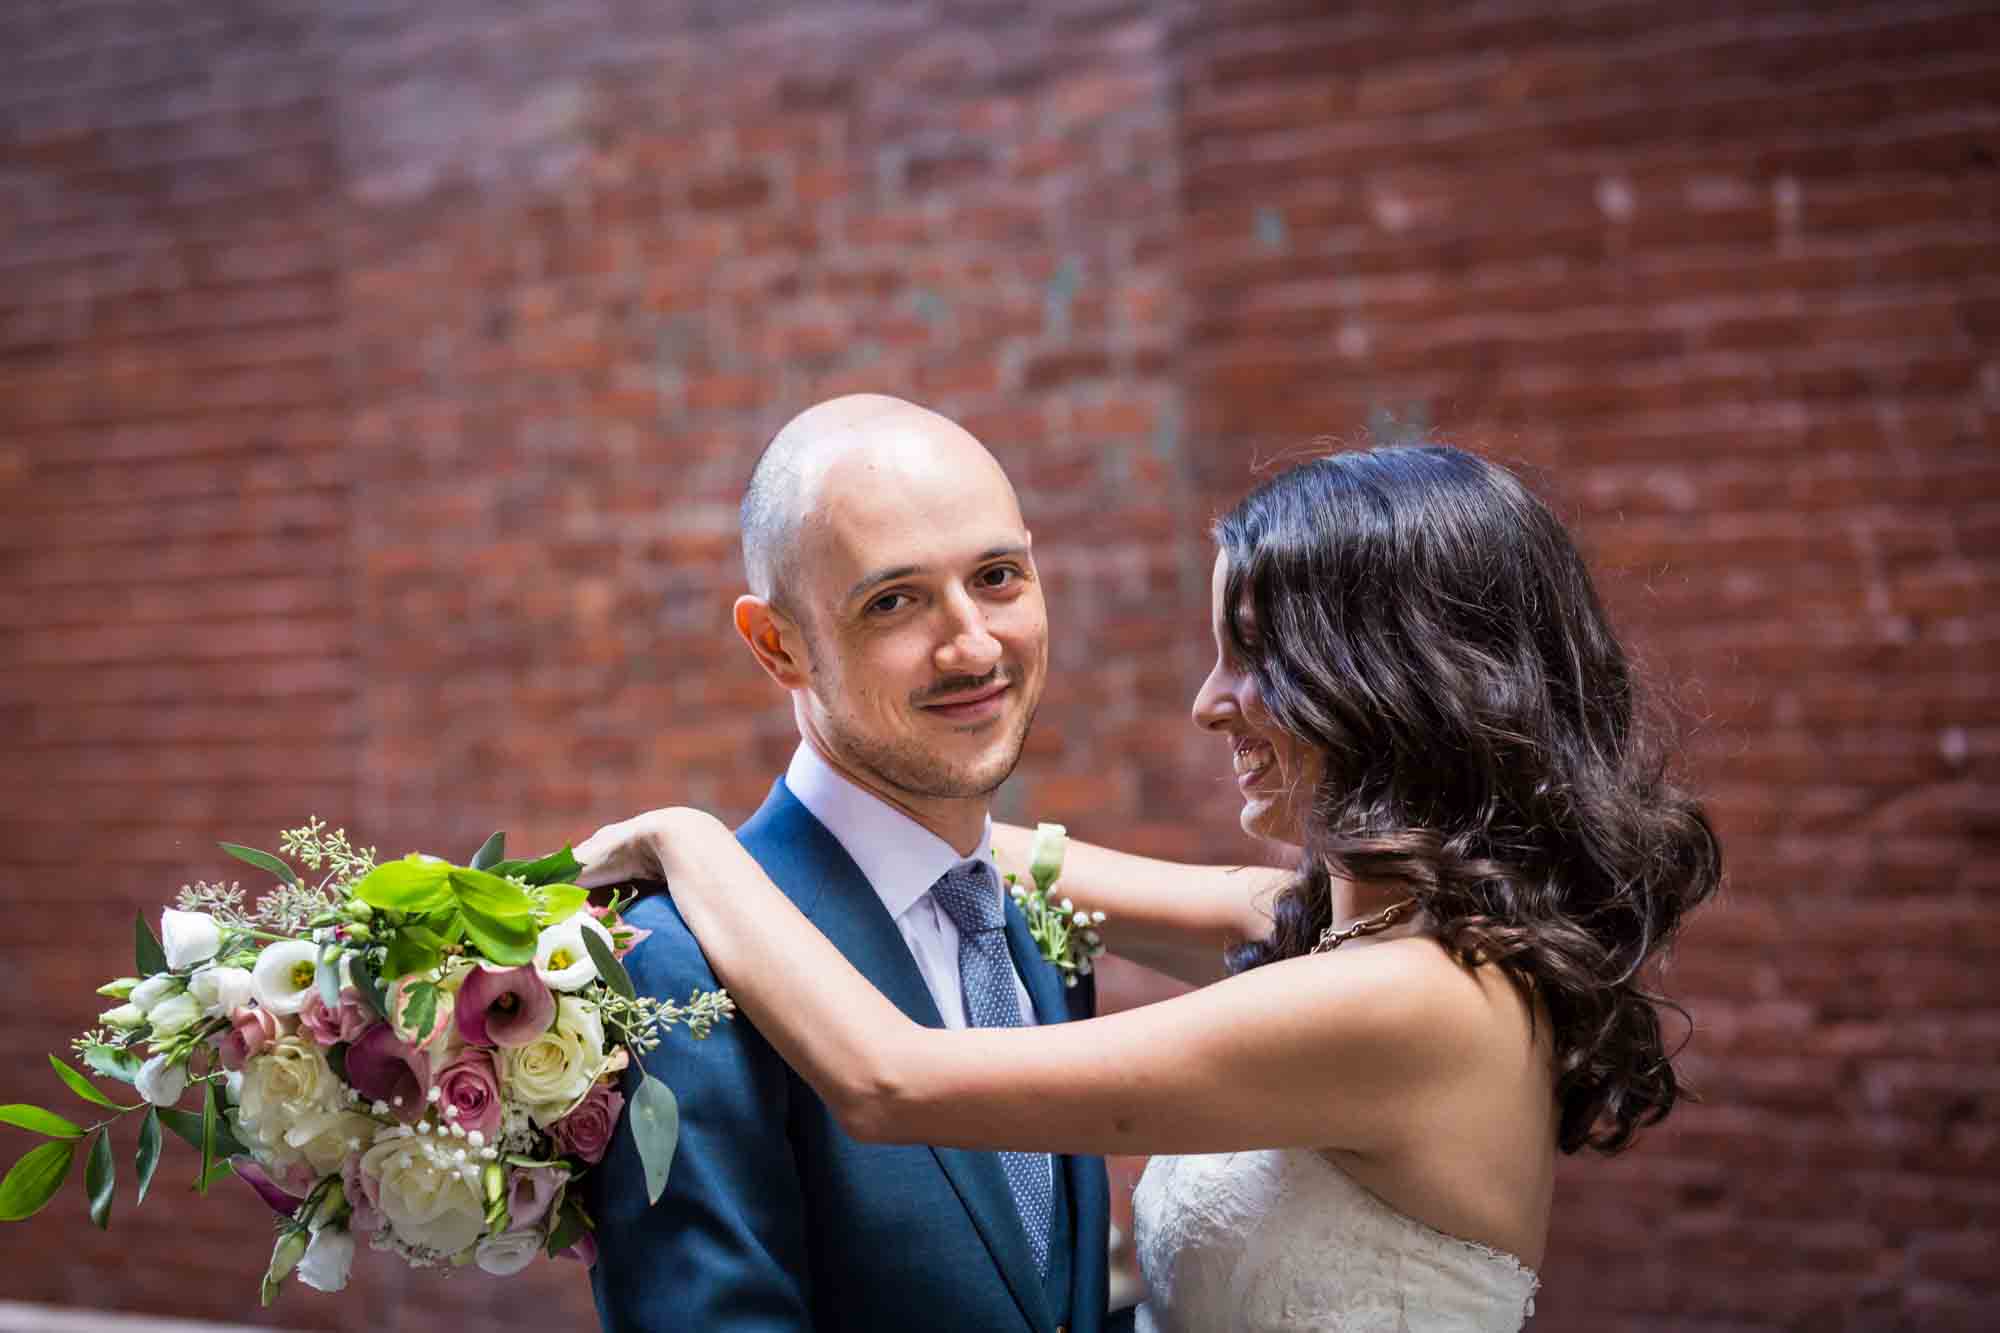 Bride holding bouquet and hugging groom against brick wall